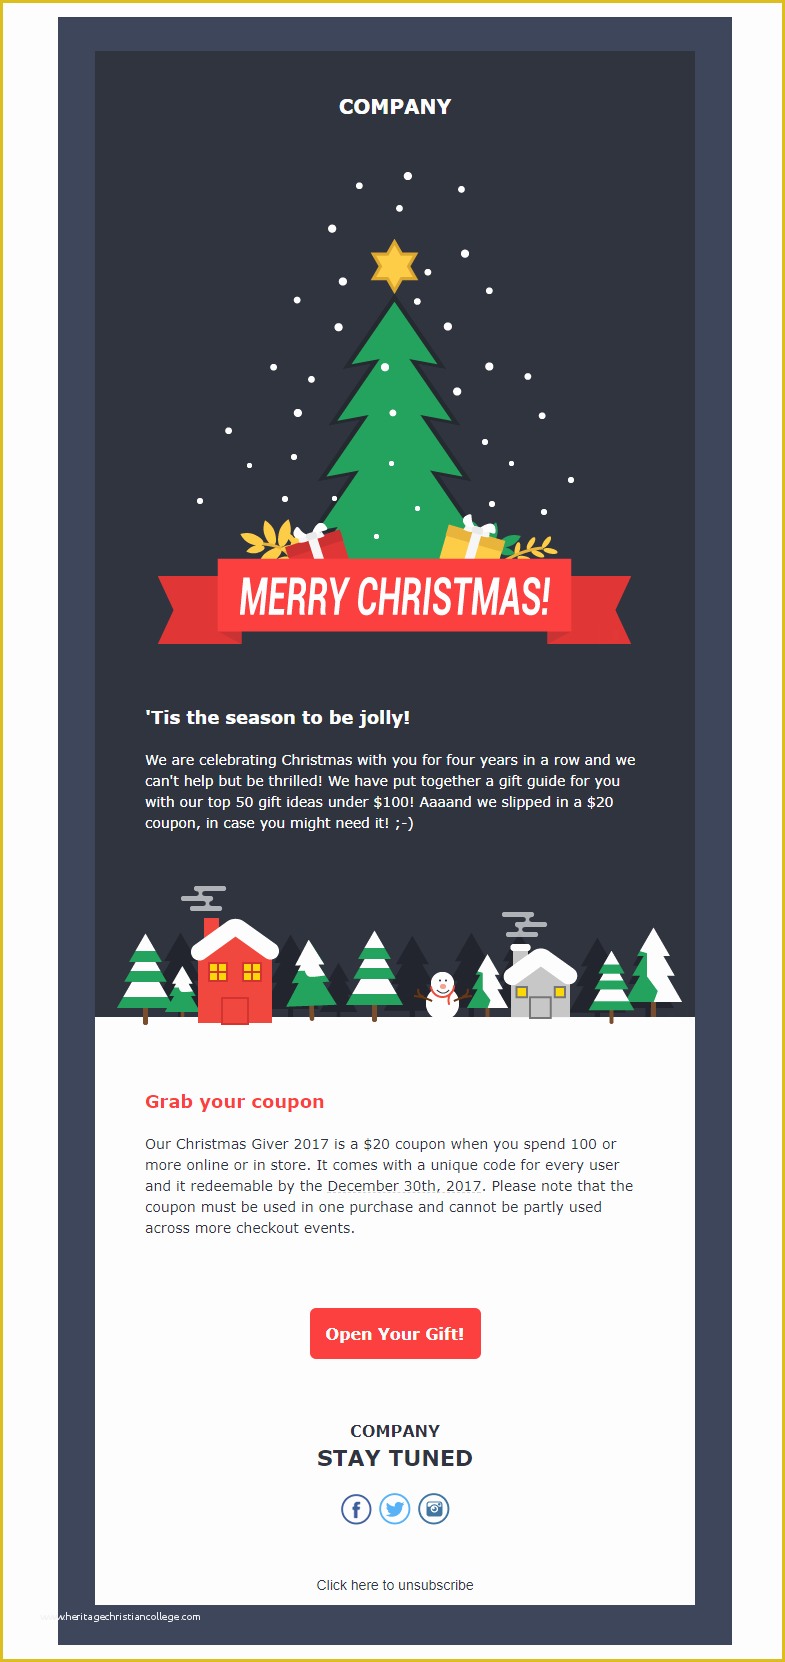 Free Christmas Newsletter Templates Of top 5 Free Christmas Newsletter Templates to Rock Xmas 2017